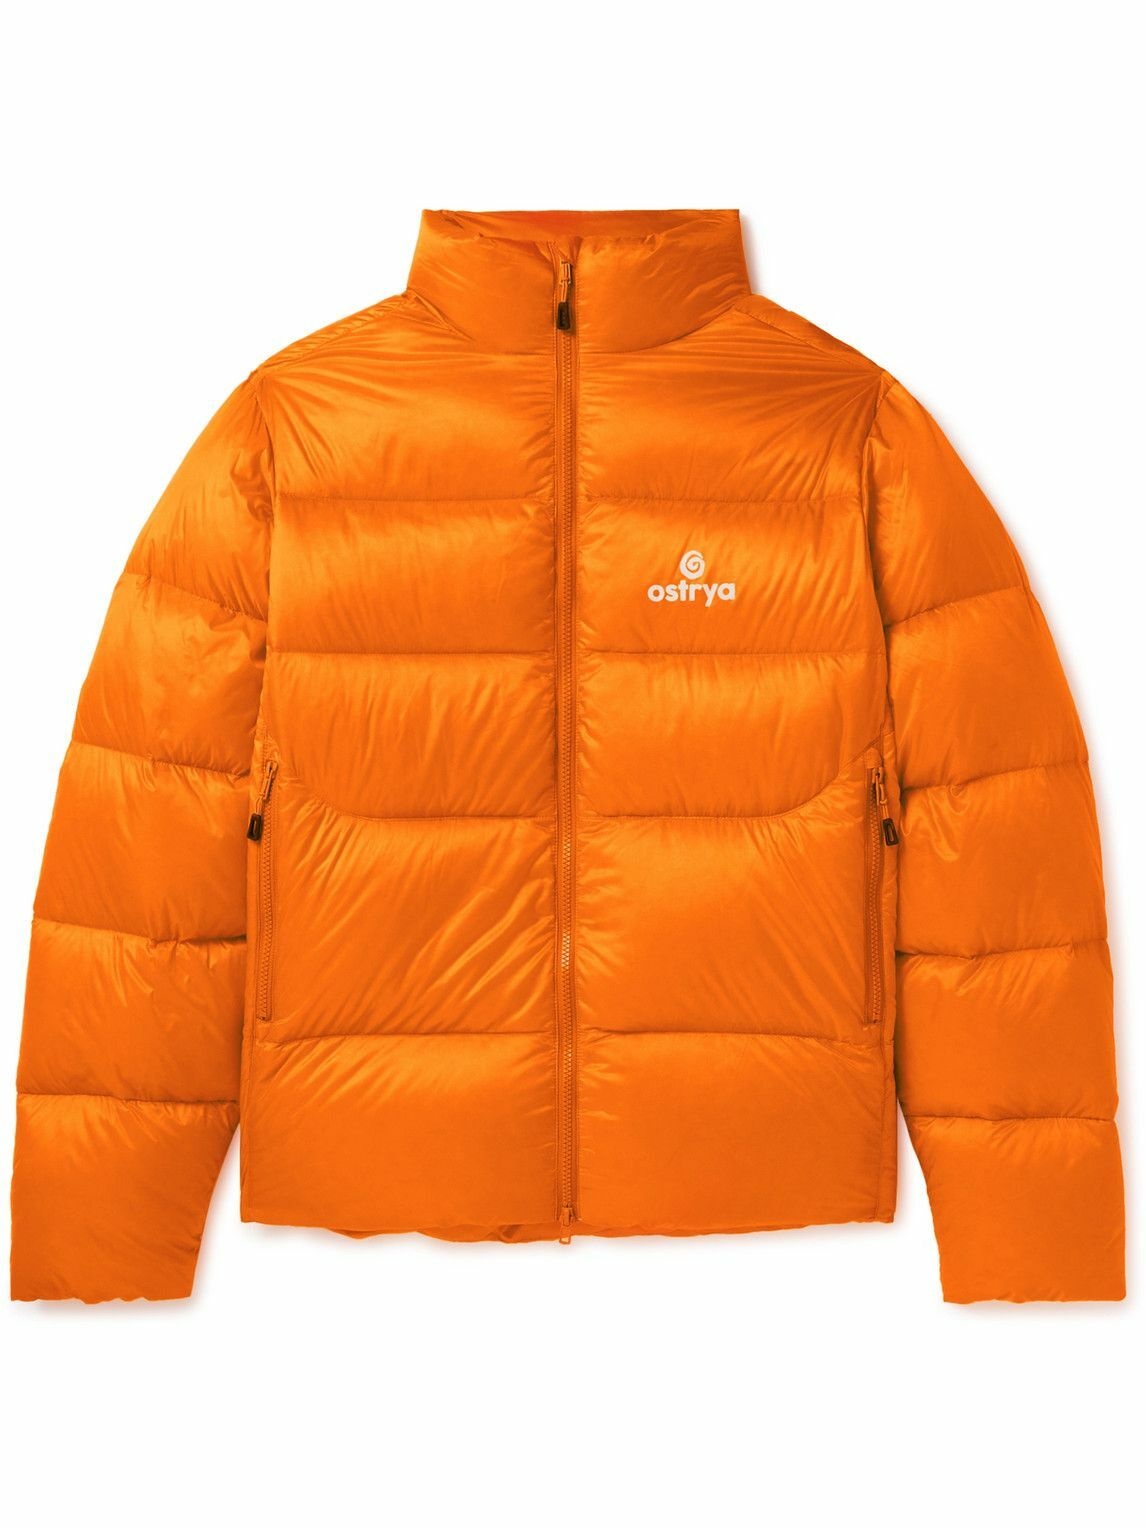 Photo: OSTRYA - Throwing Fits Squall Logo-Print Quilted Ripstop Down Jacket - Orange